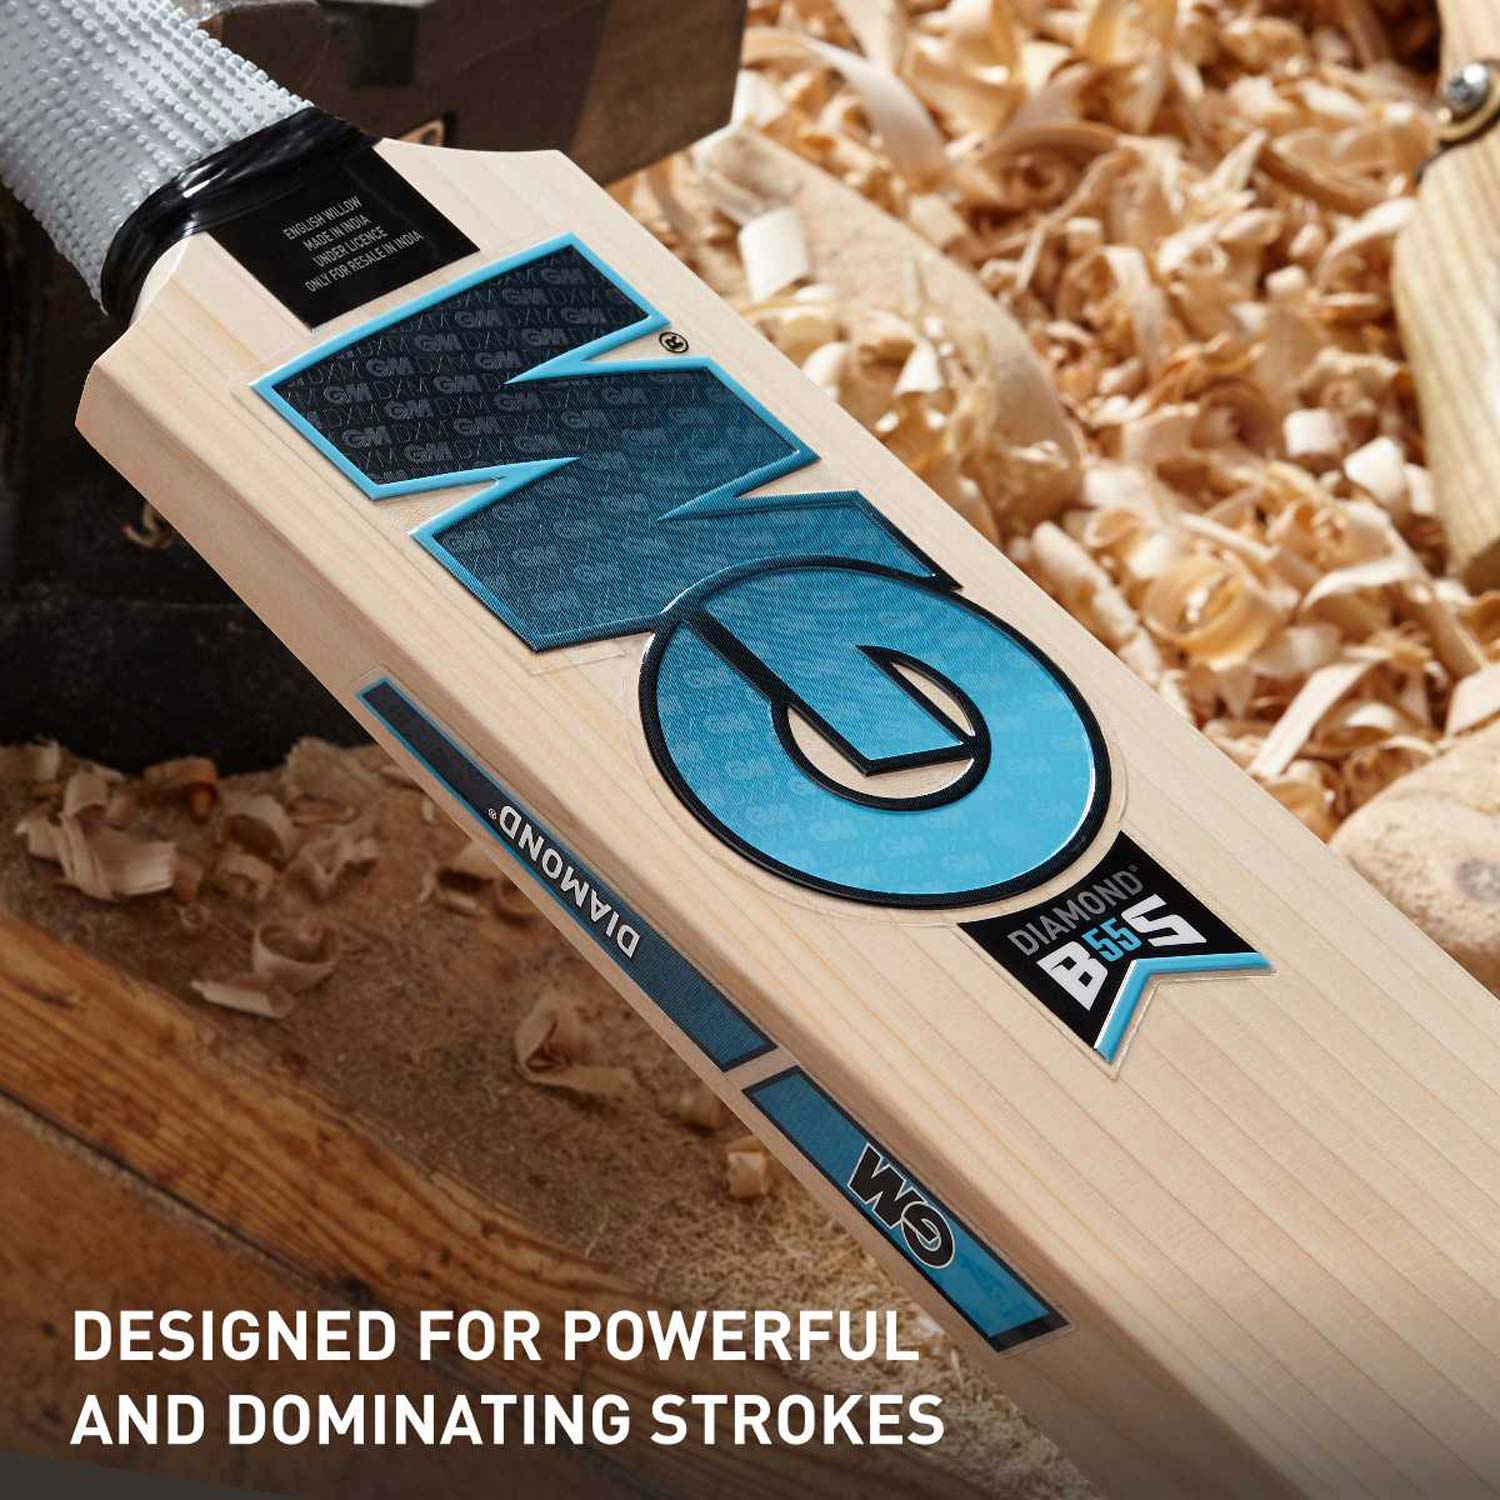 Top 10 Best Cricket Bats in India at Cialfo Sports